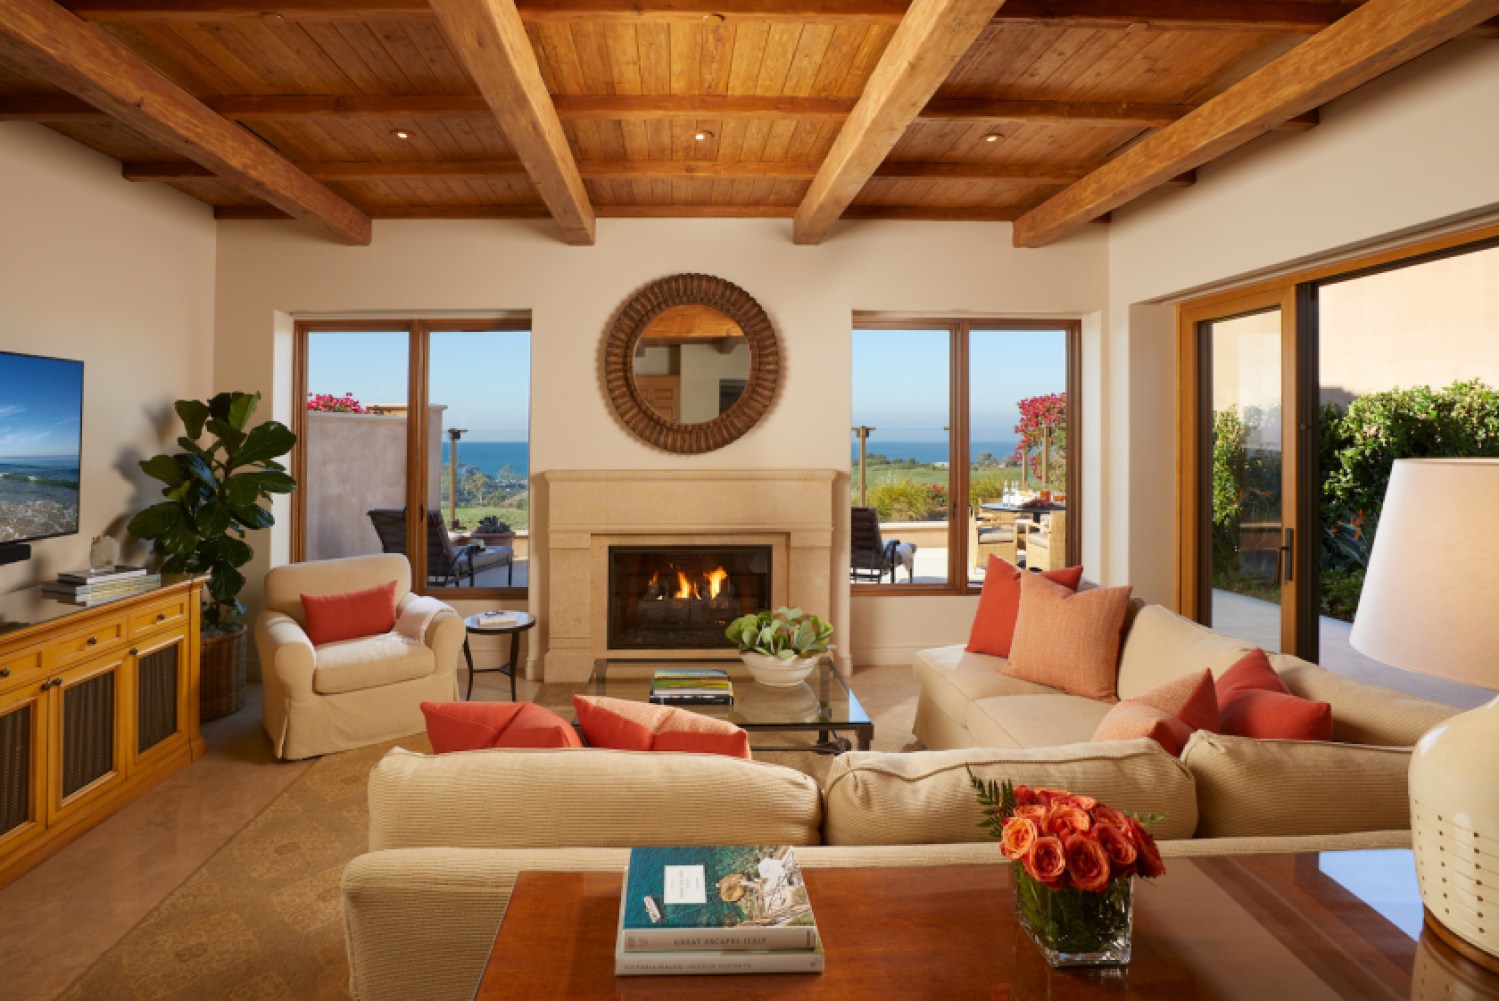 Brown-colored living room area with fireplace, red-orange accents and a view of the water